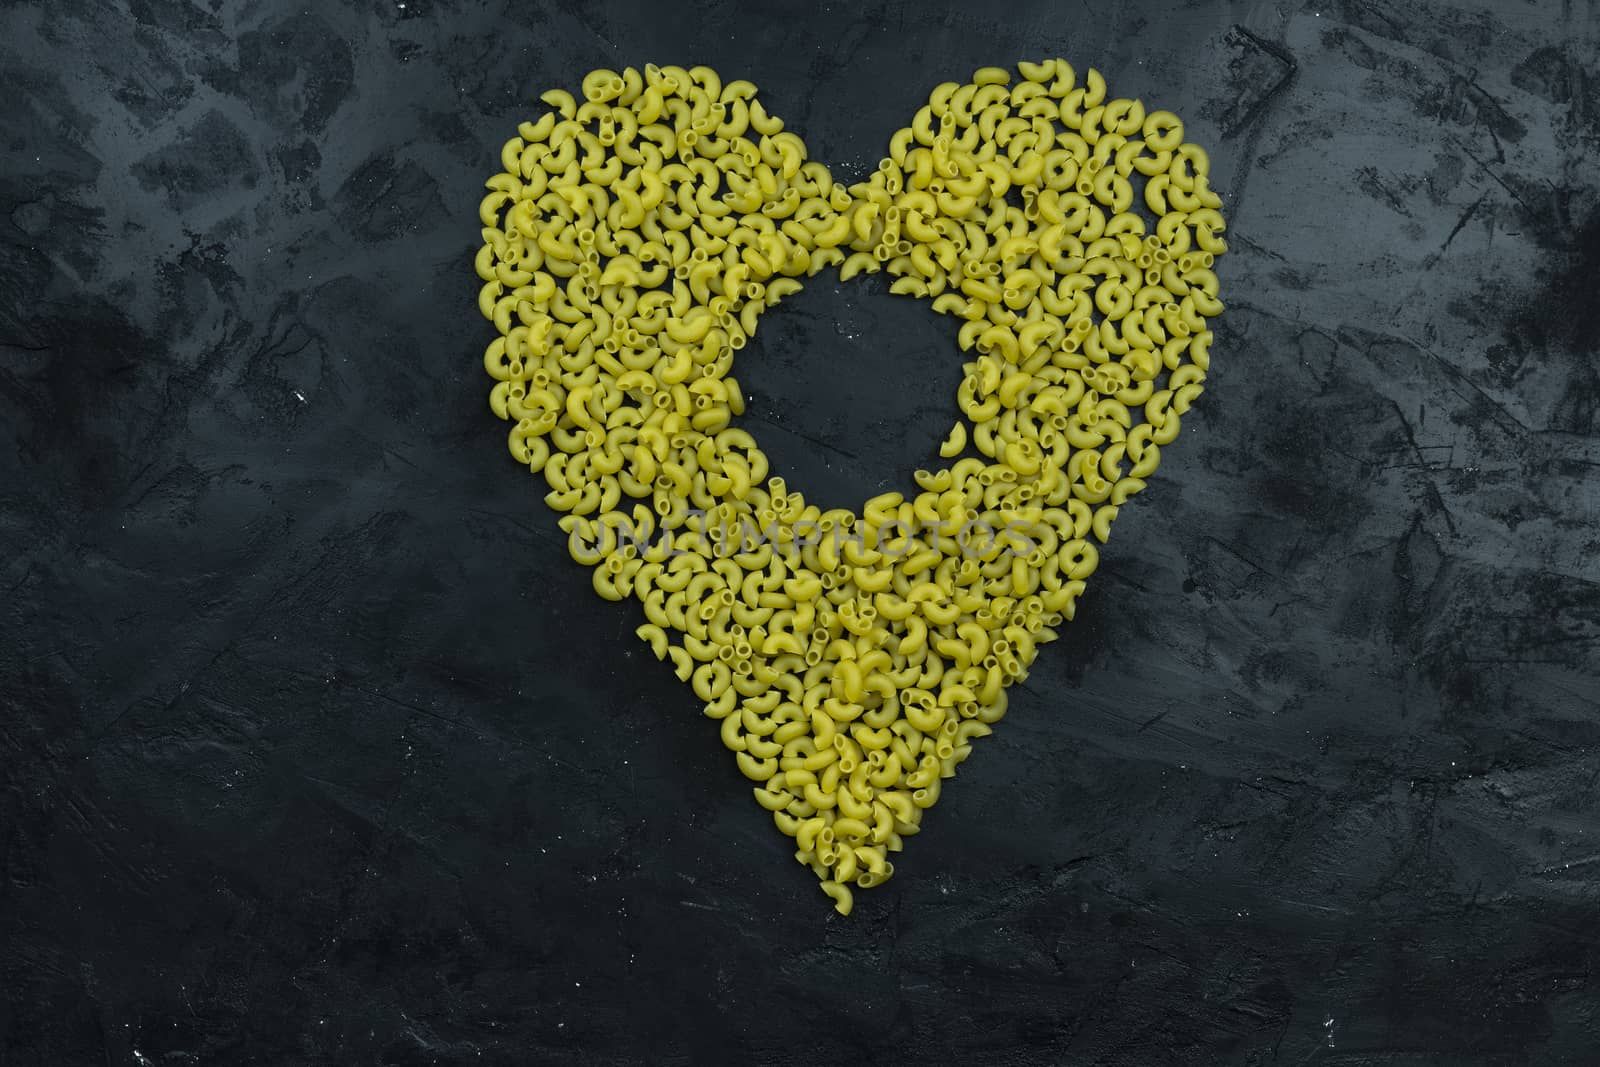 Pasta in the shape of a heart on a black background by sashokddt